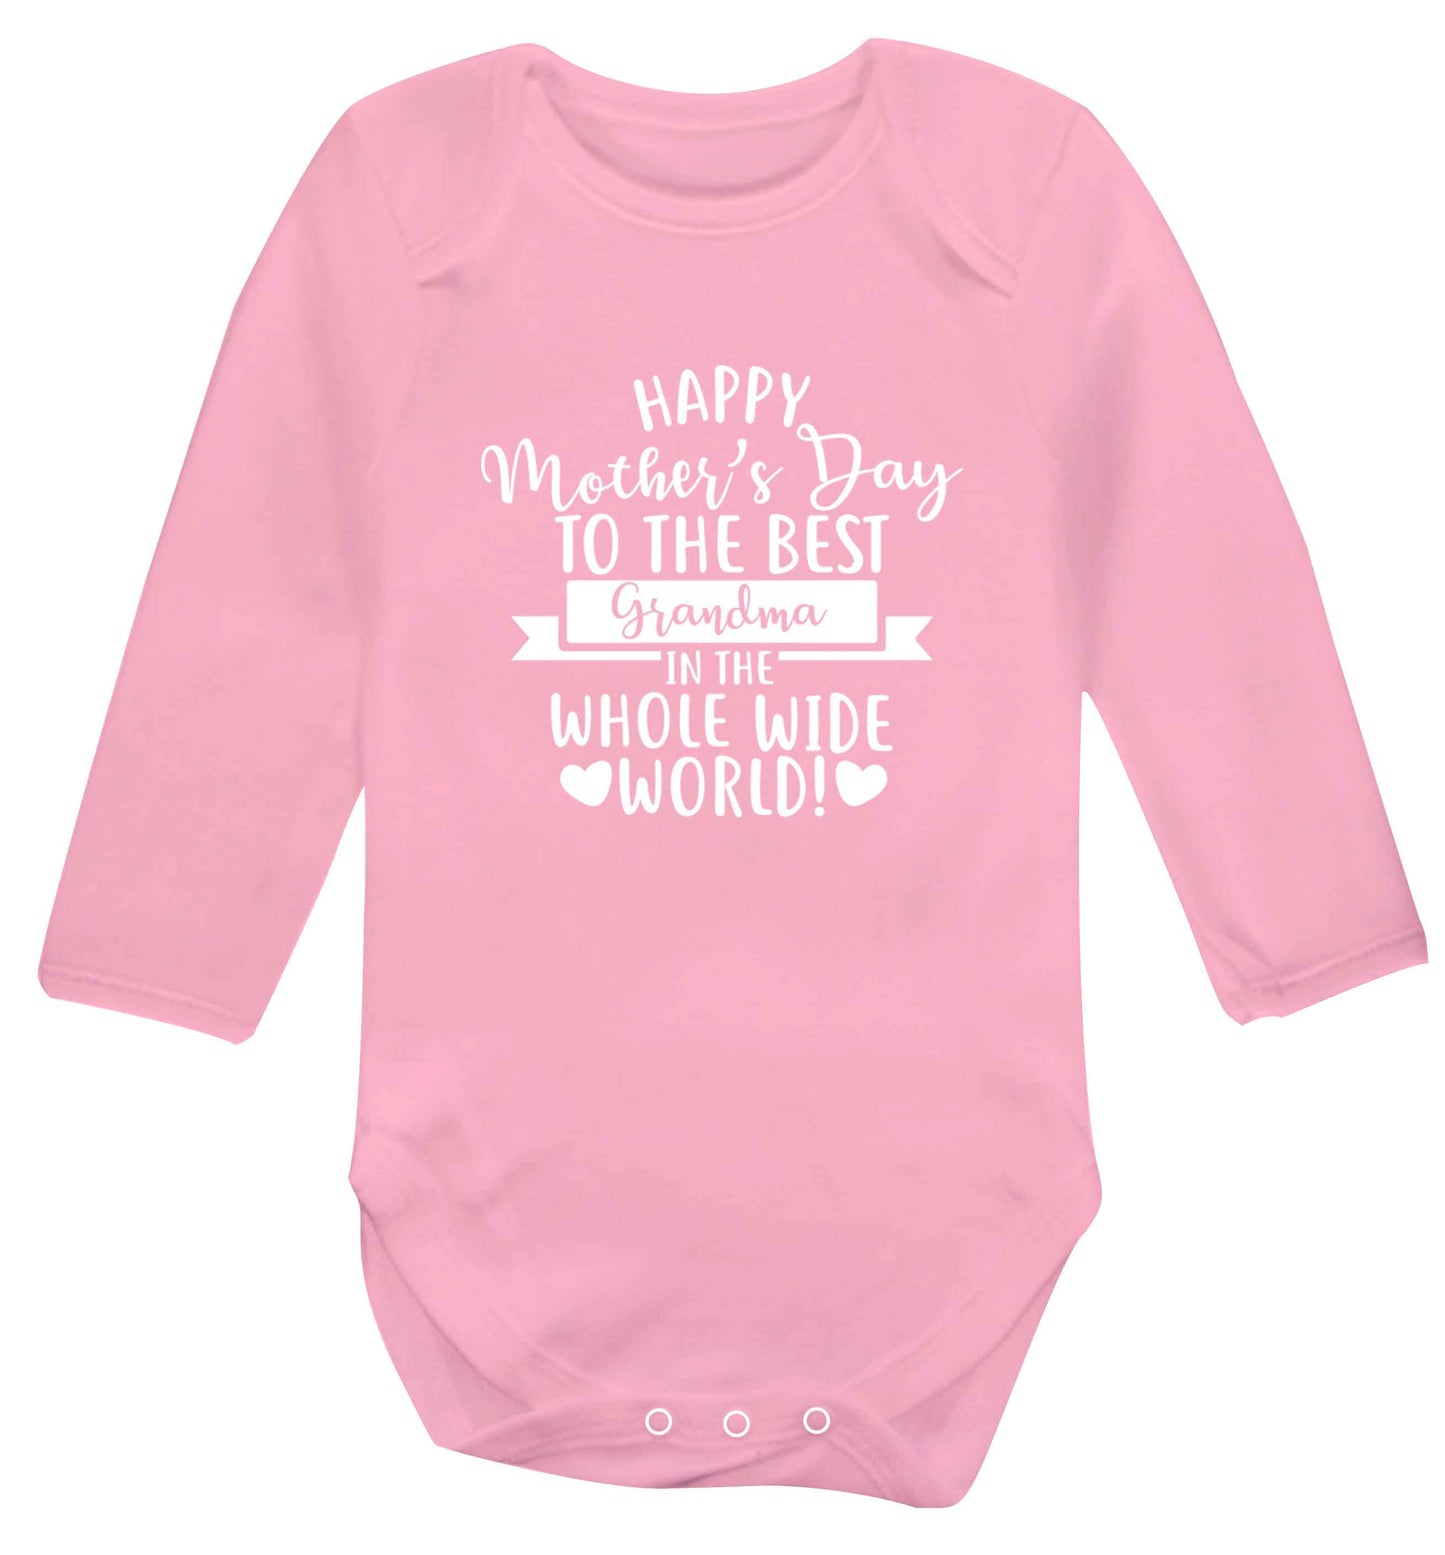 Happy mother's day to the best grandma in the world baby vest long sleeved pale pink 6-12 months